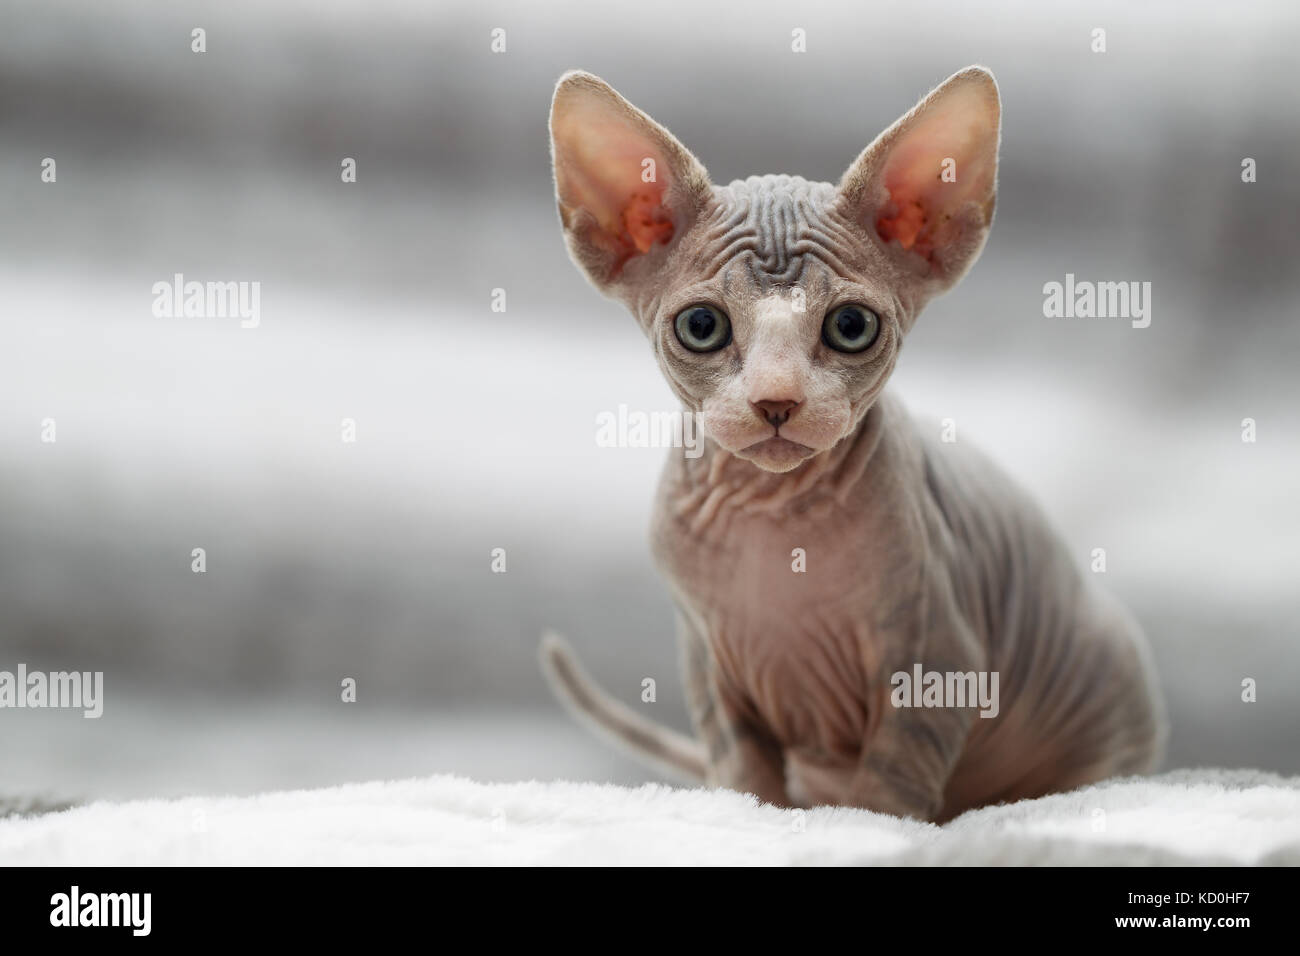 Animal portrait of sphynx cat looking at camera Stock Photo